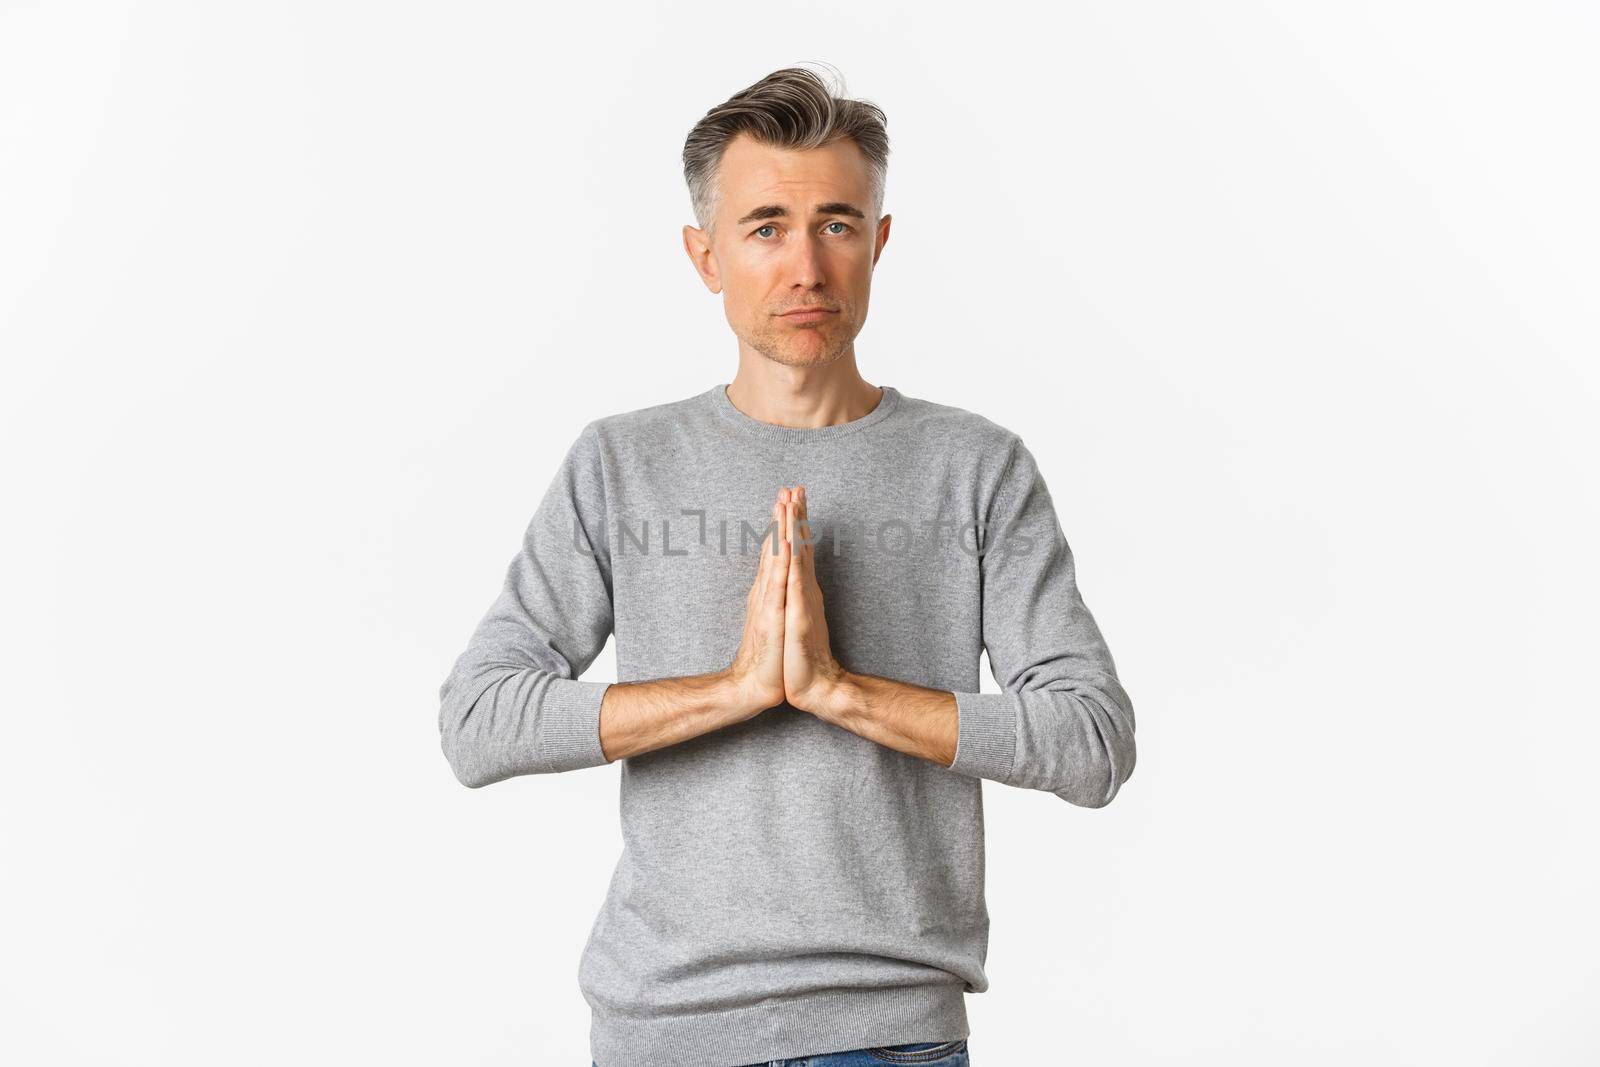 Image of sad middle-aged man begging for help, need something and asking for favour, standing over white background.